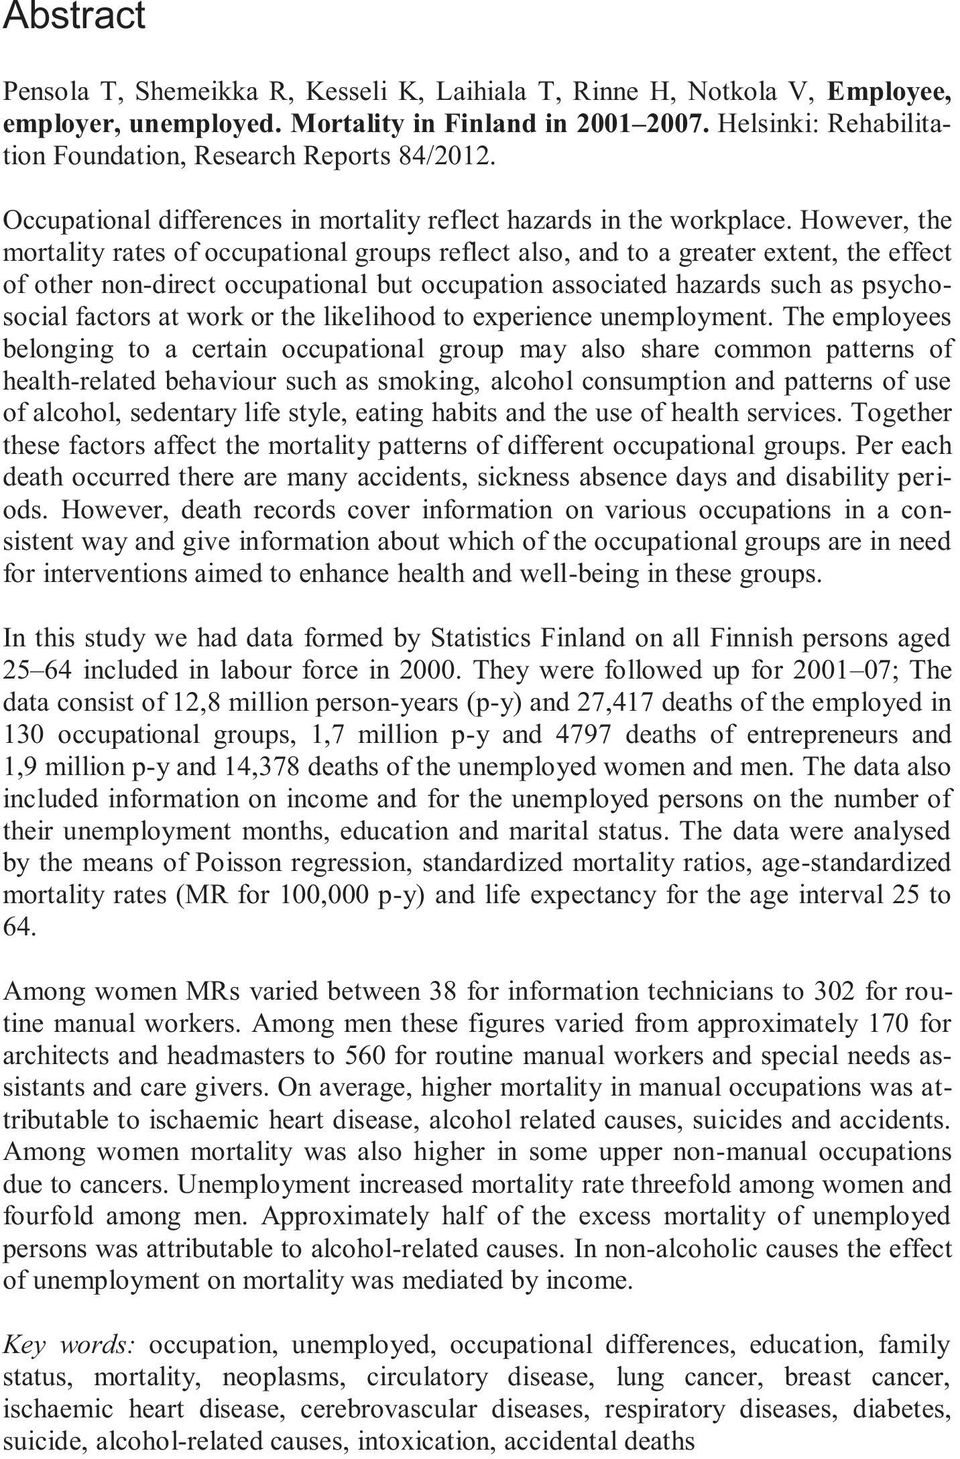 However, the mortality rates of occupational groups reflect also, and to a greater extent, the effect of other non-direct occupational but occupation associated hazards such as psychosocial factors